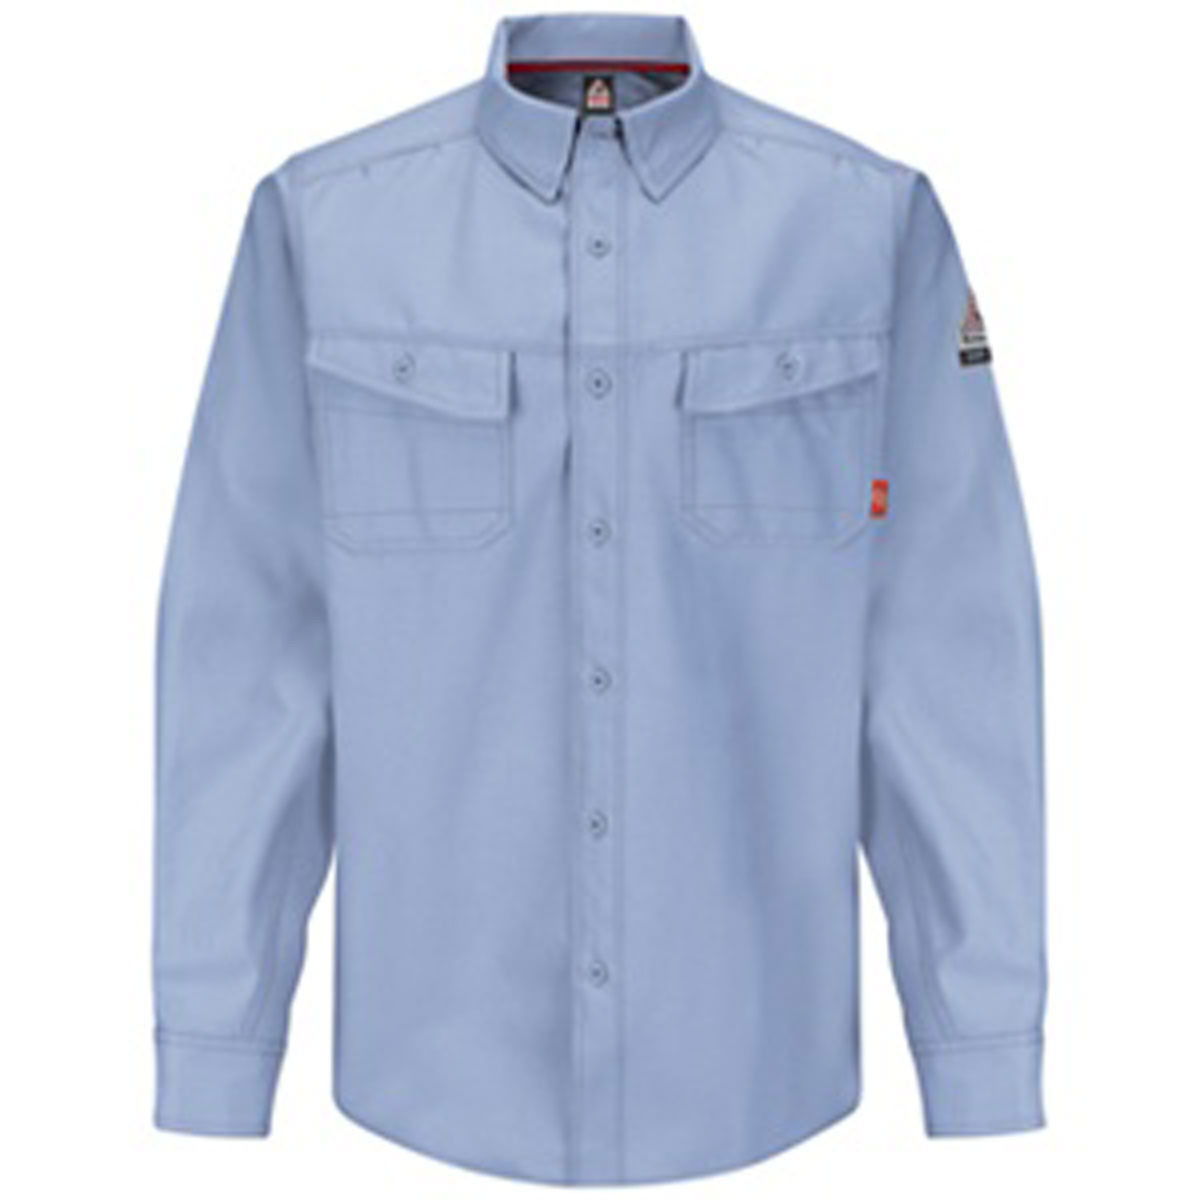 What storage features are provided by the Bulwark FR shirts in the iQ Series QS40LB?